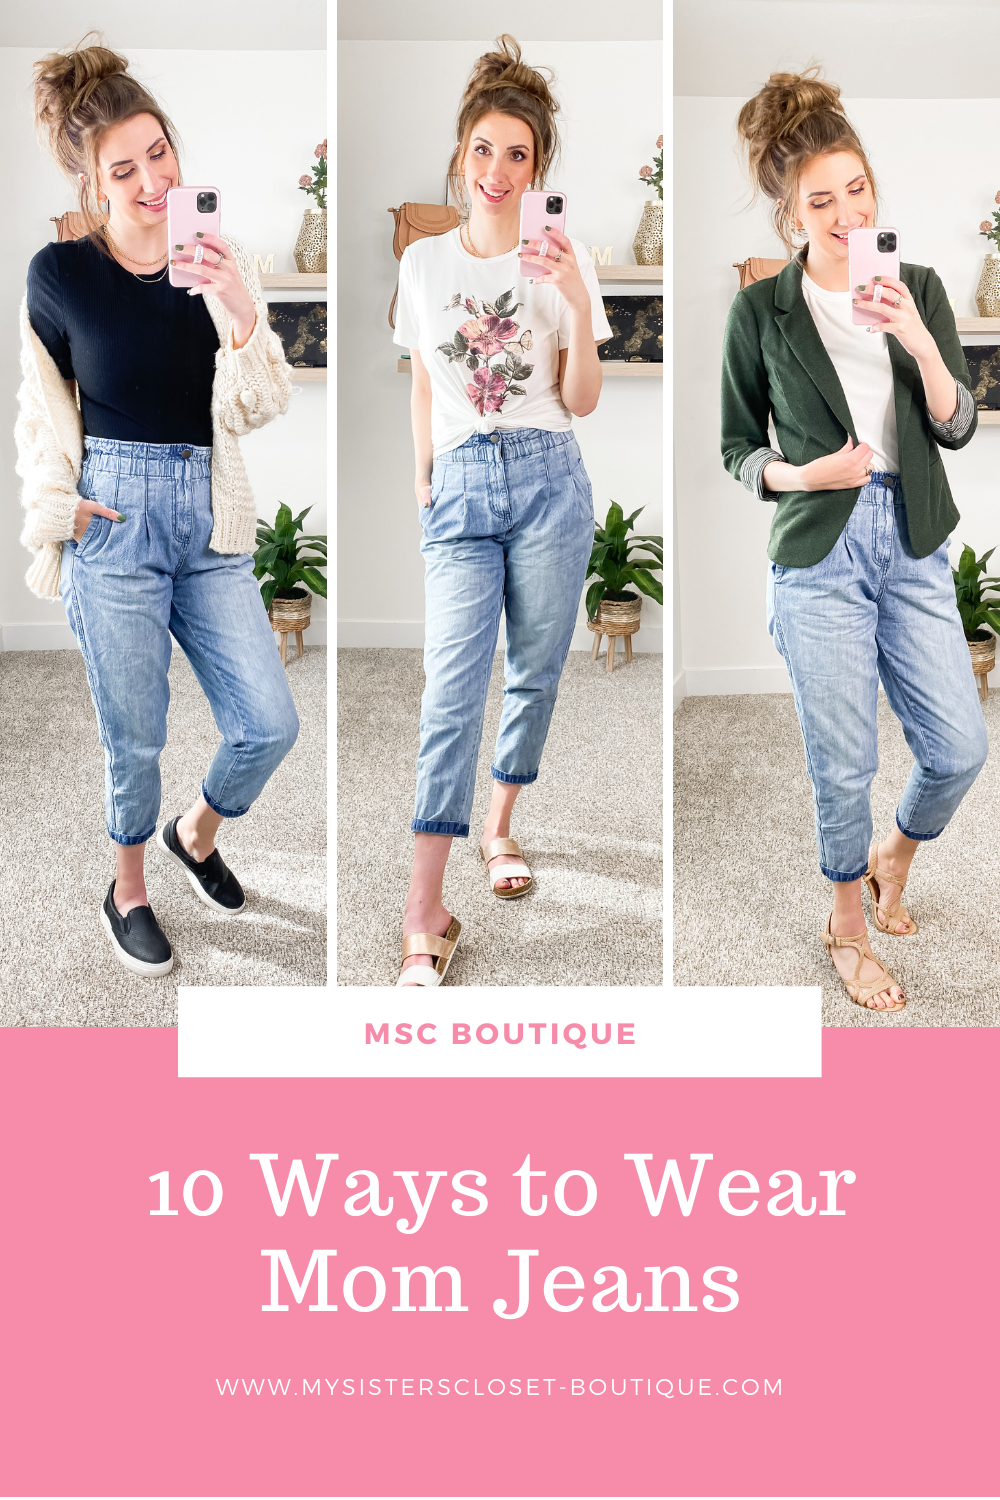 5 Ways To Style Straight Leg Jeans - Life With Jazz, Business Casual  Outfits For Women Jeans